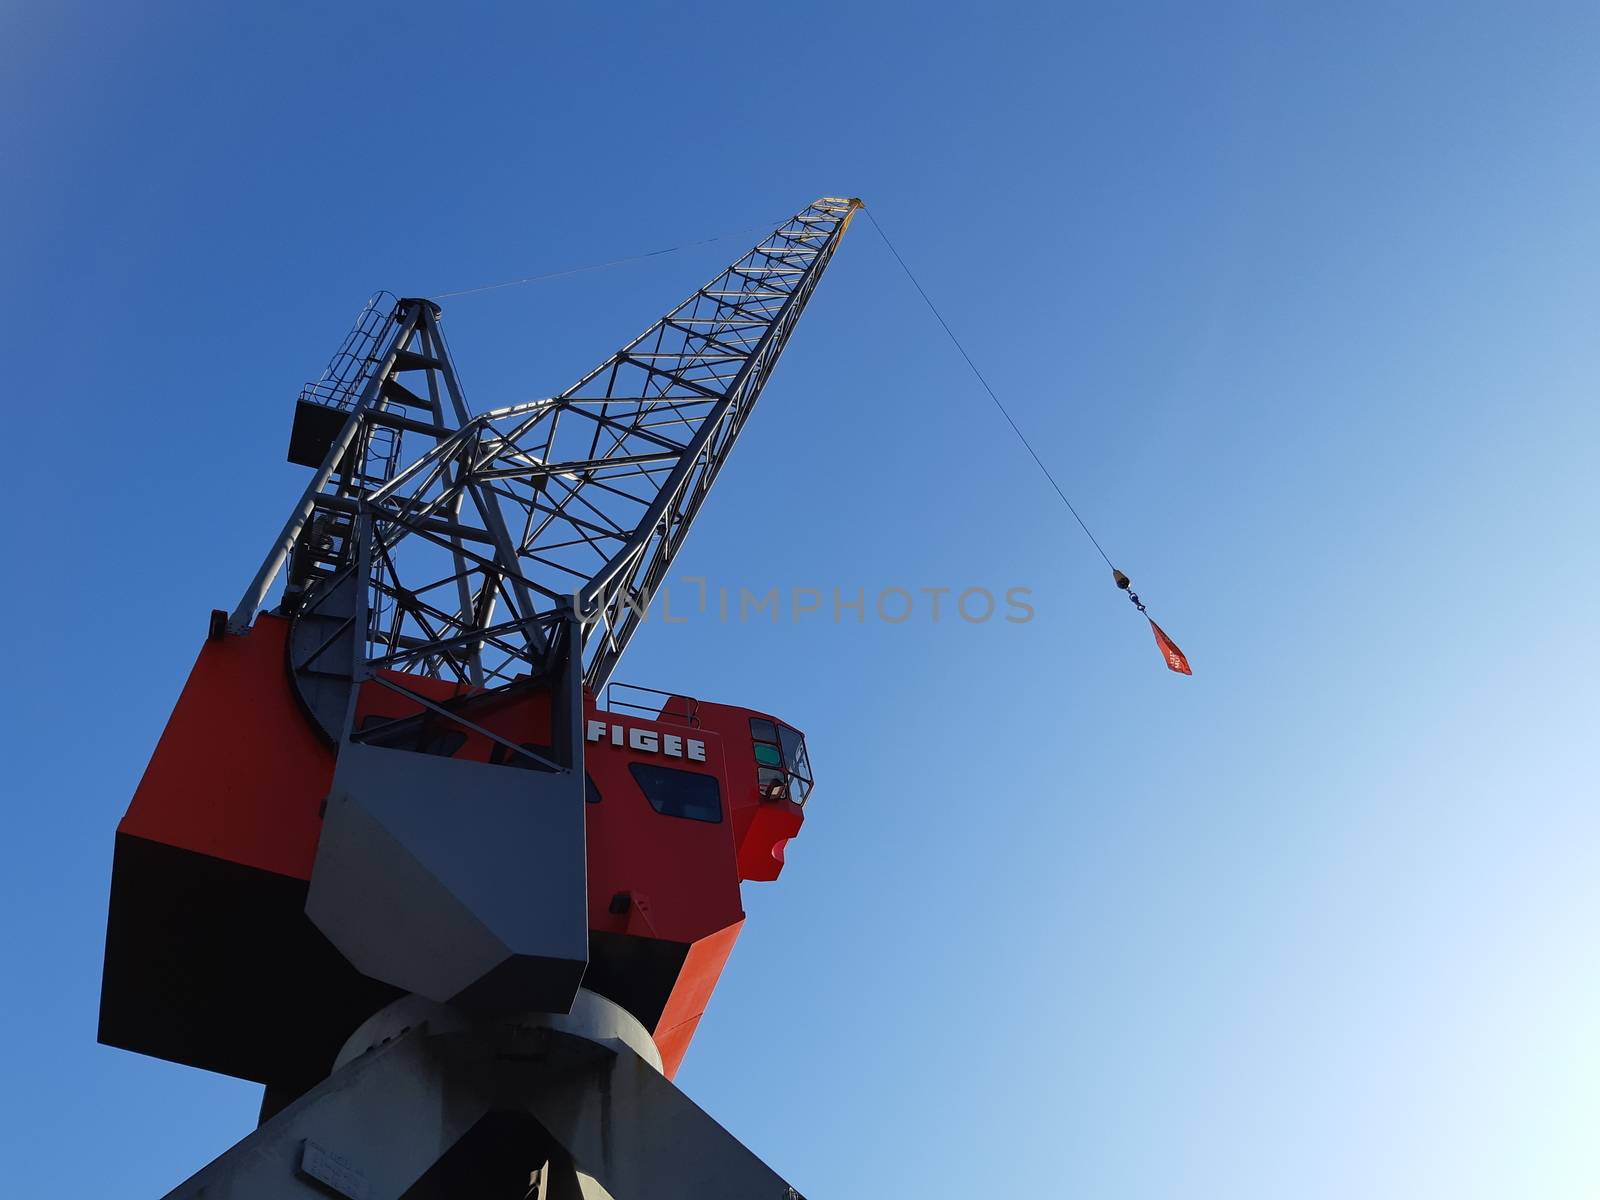 Rotterdam, Netherlands, September 2019: view on the historical red Figee harbor crane in Leuvehaven, Rotterdam